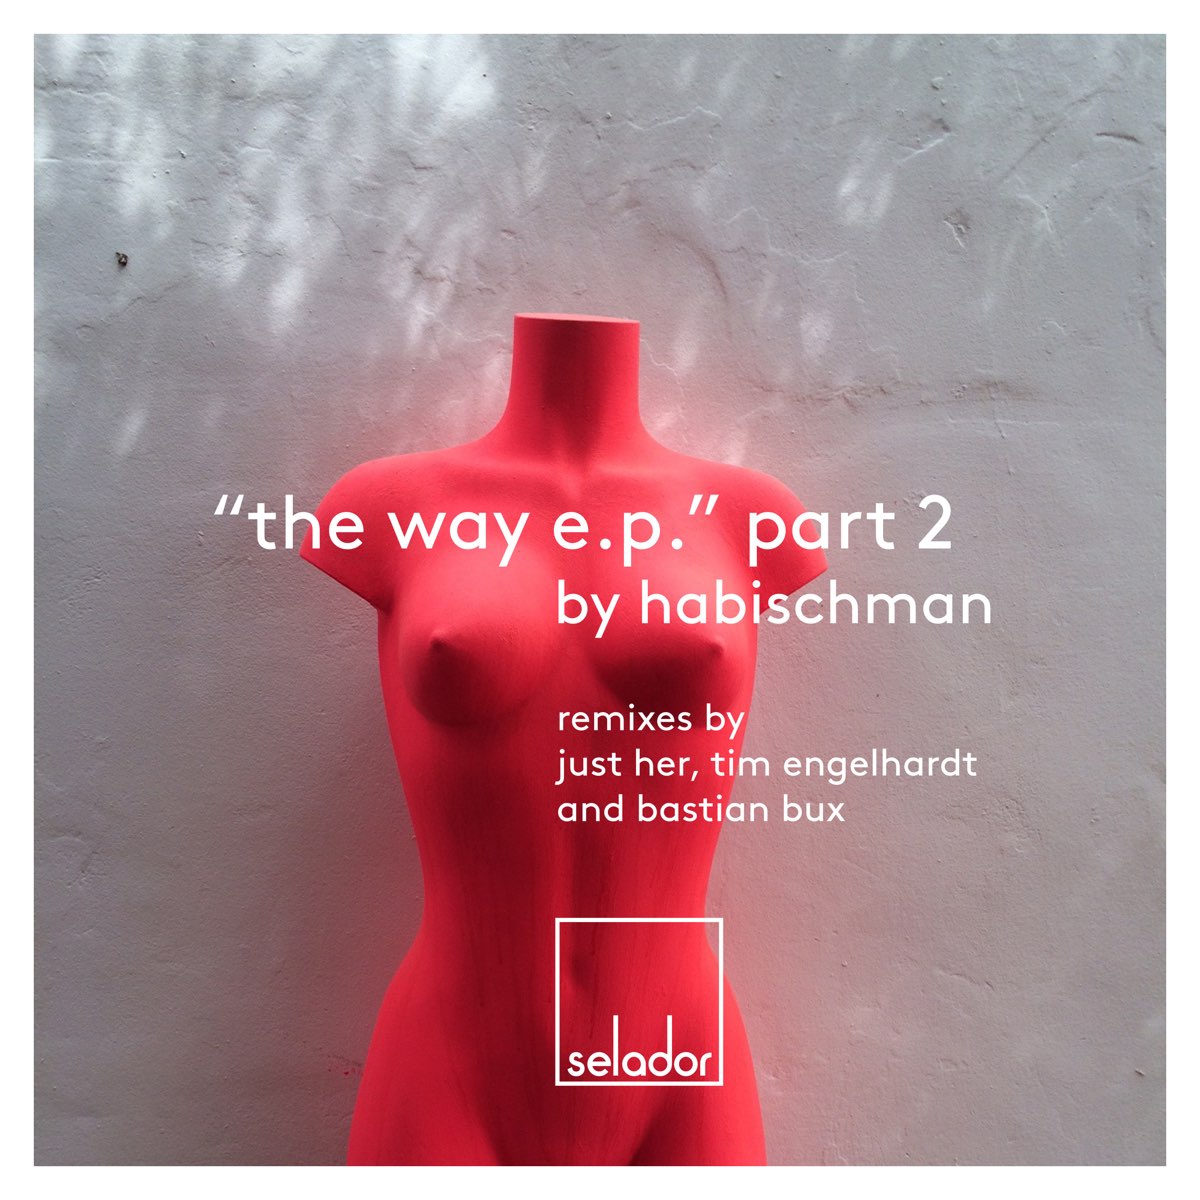 Habischman. Bastian bux. Bastian Dream. Hybrid Remix and additional Production by. I just can way